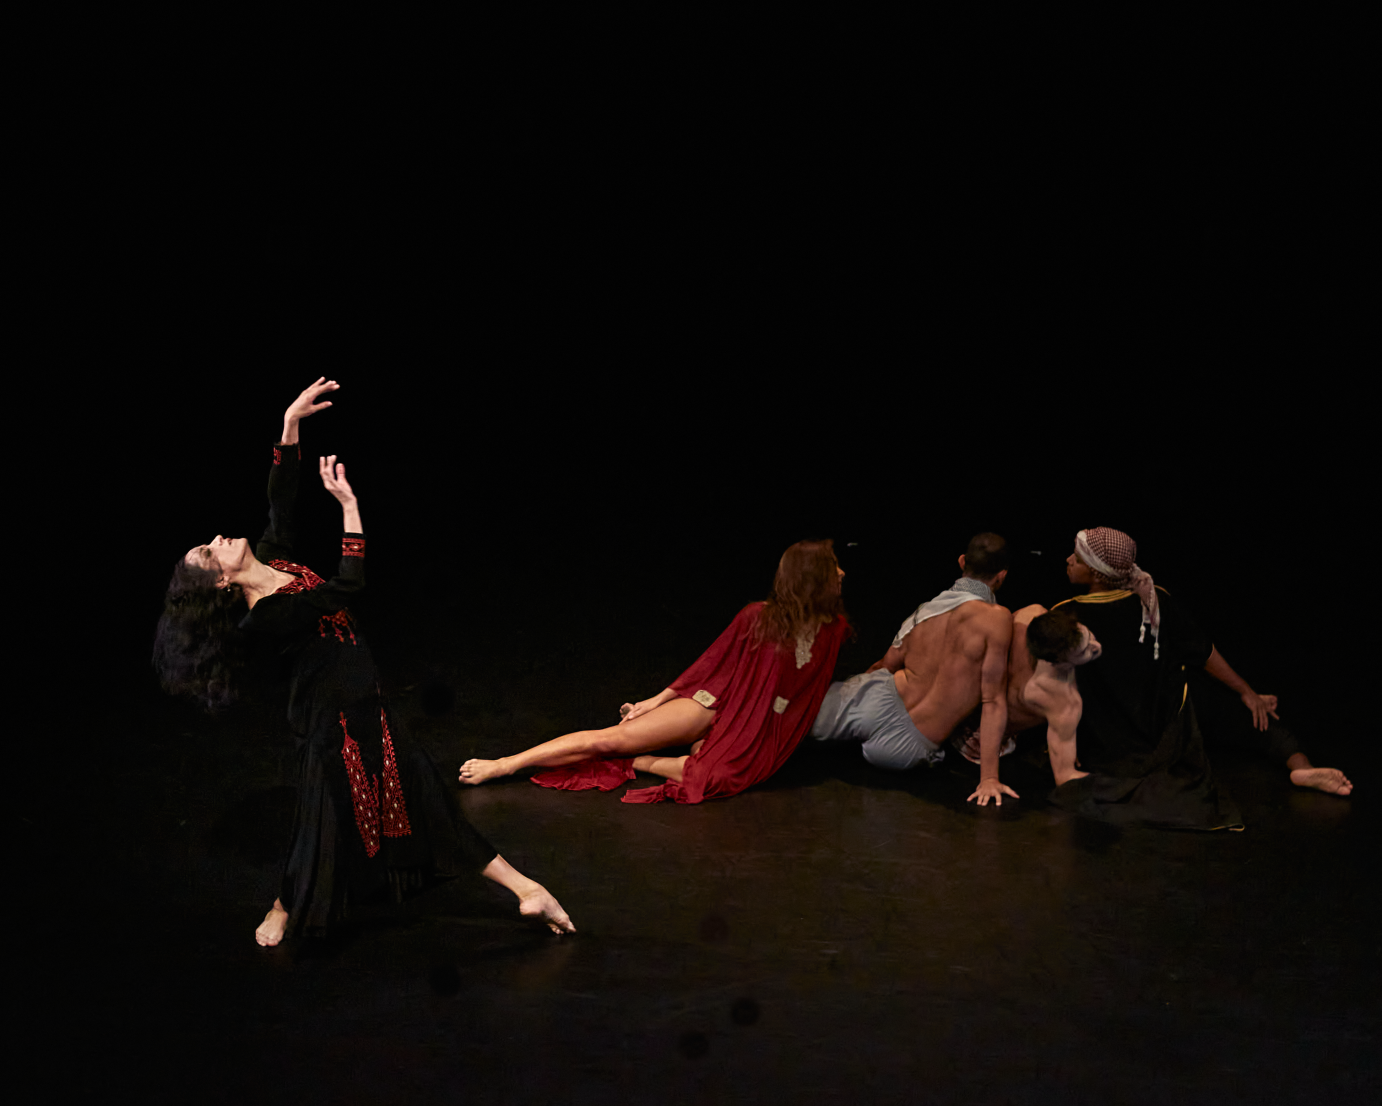 The cast of the Mirage sits on the floor in a diagonal, their backs to the audience. Elisa Toro Franks stands at the end of the diagonal. She lifts a hand and gazes upward.